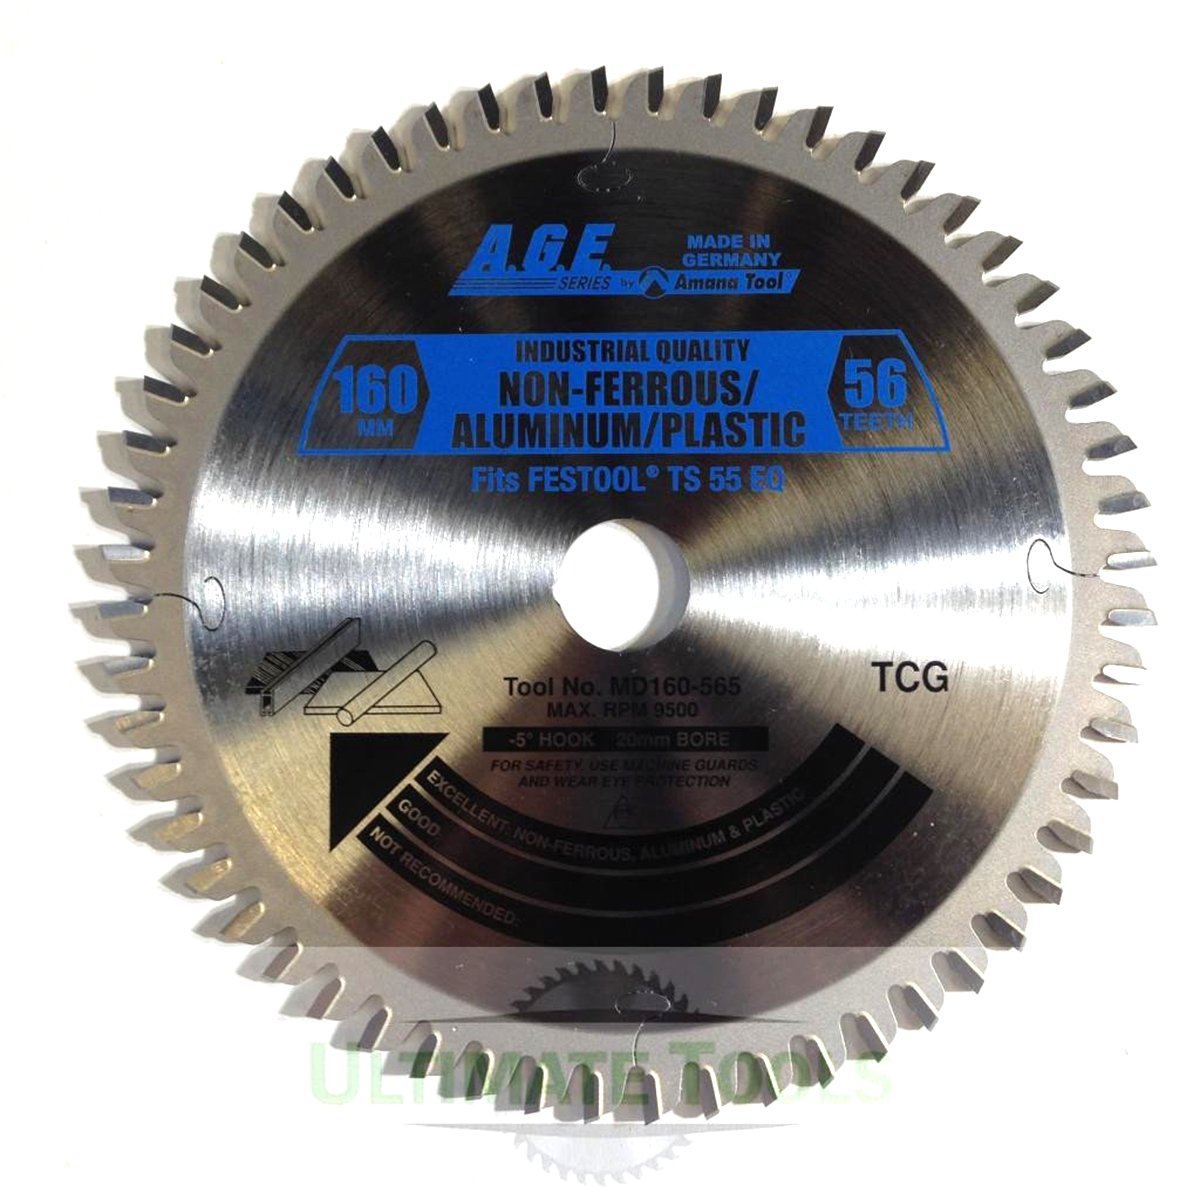 56-tooth TCG saw blade for cutting non-ferrous materials, aluminum, plastic. 160mm with 20mm bore for Festool TS 55/TSC 55.